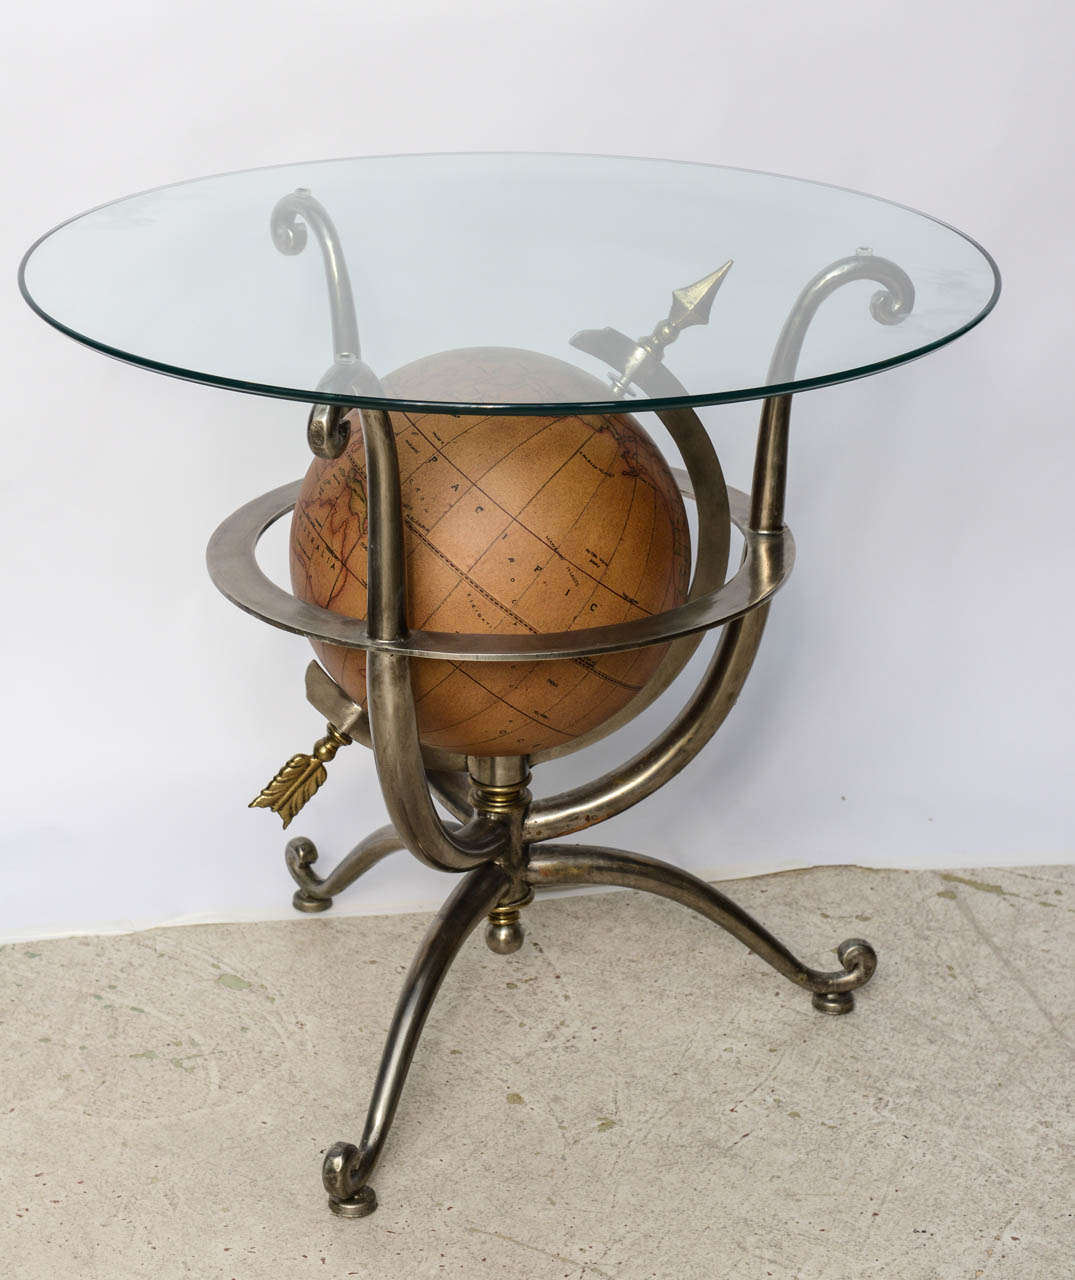 Very stylish steel and brass globe side table with glass top.